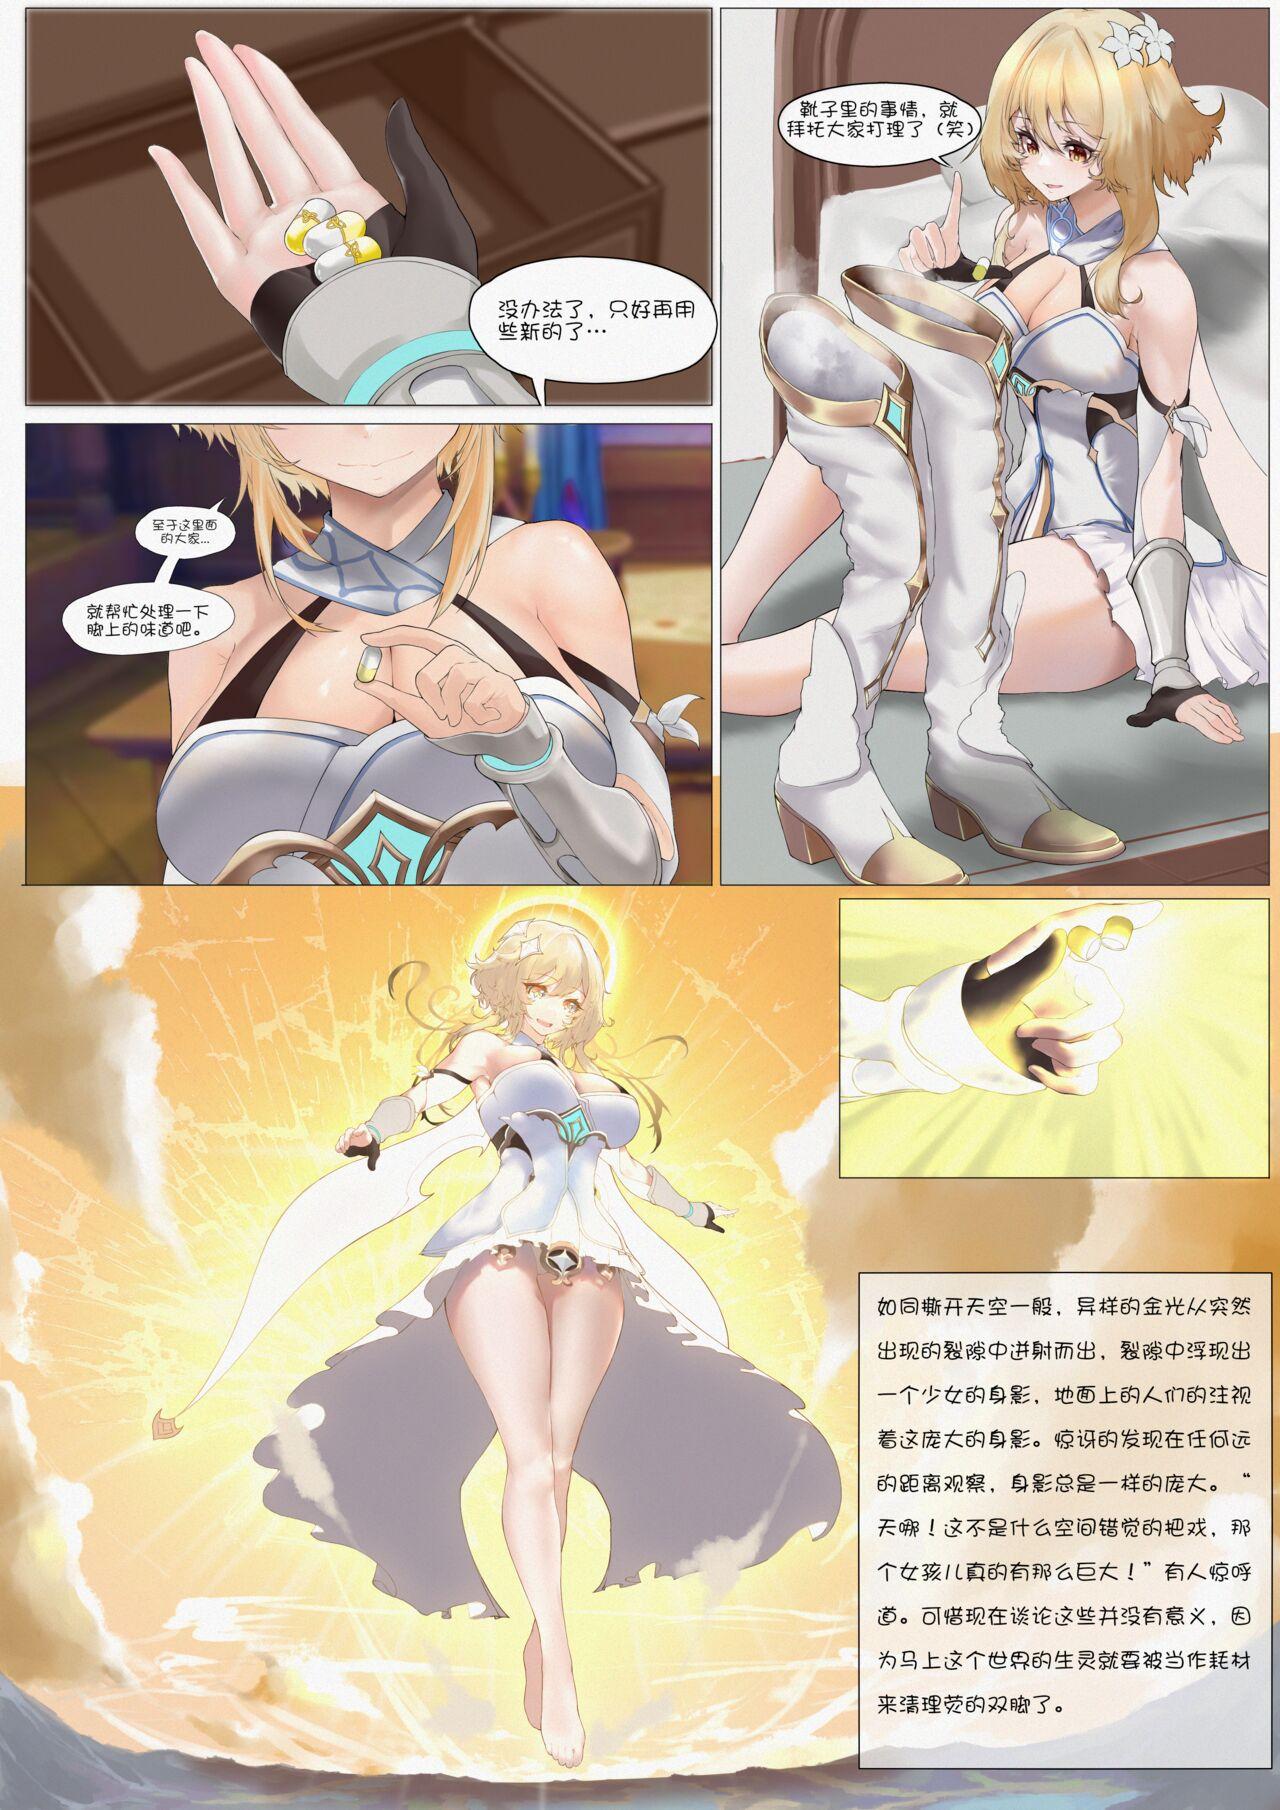 Whipping Just A Little Daily Story About Lumine - Genshin impact Sex Toys - Page 4